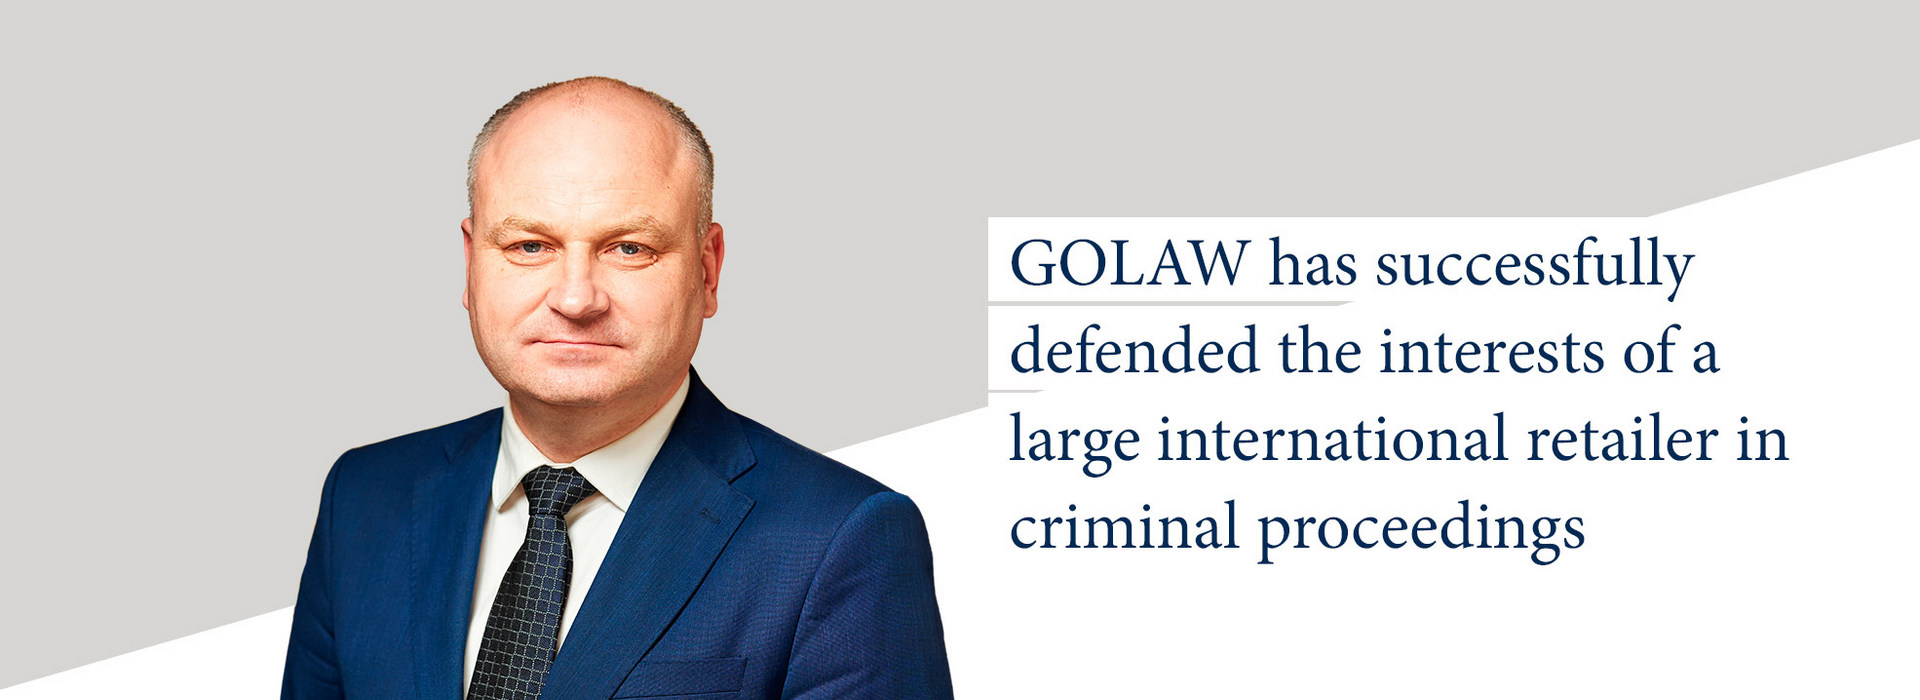 GOLAW Has Successfully Defended the Interests of a Large International Retailer in Criminal Proceedings